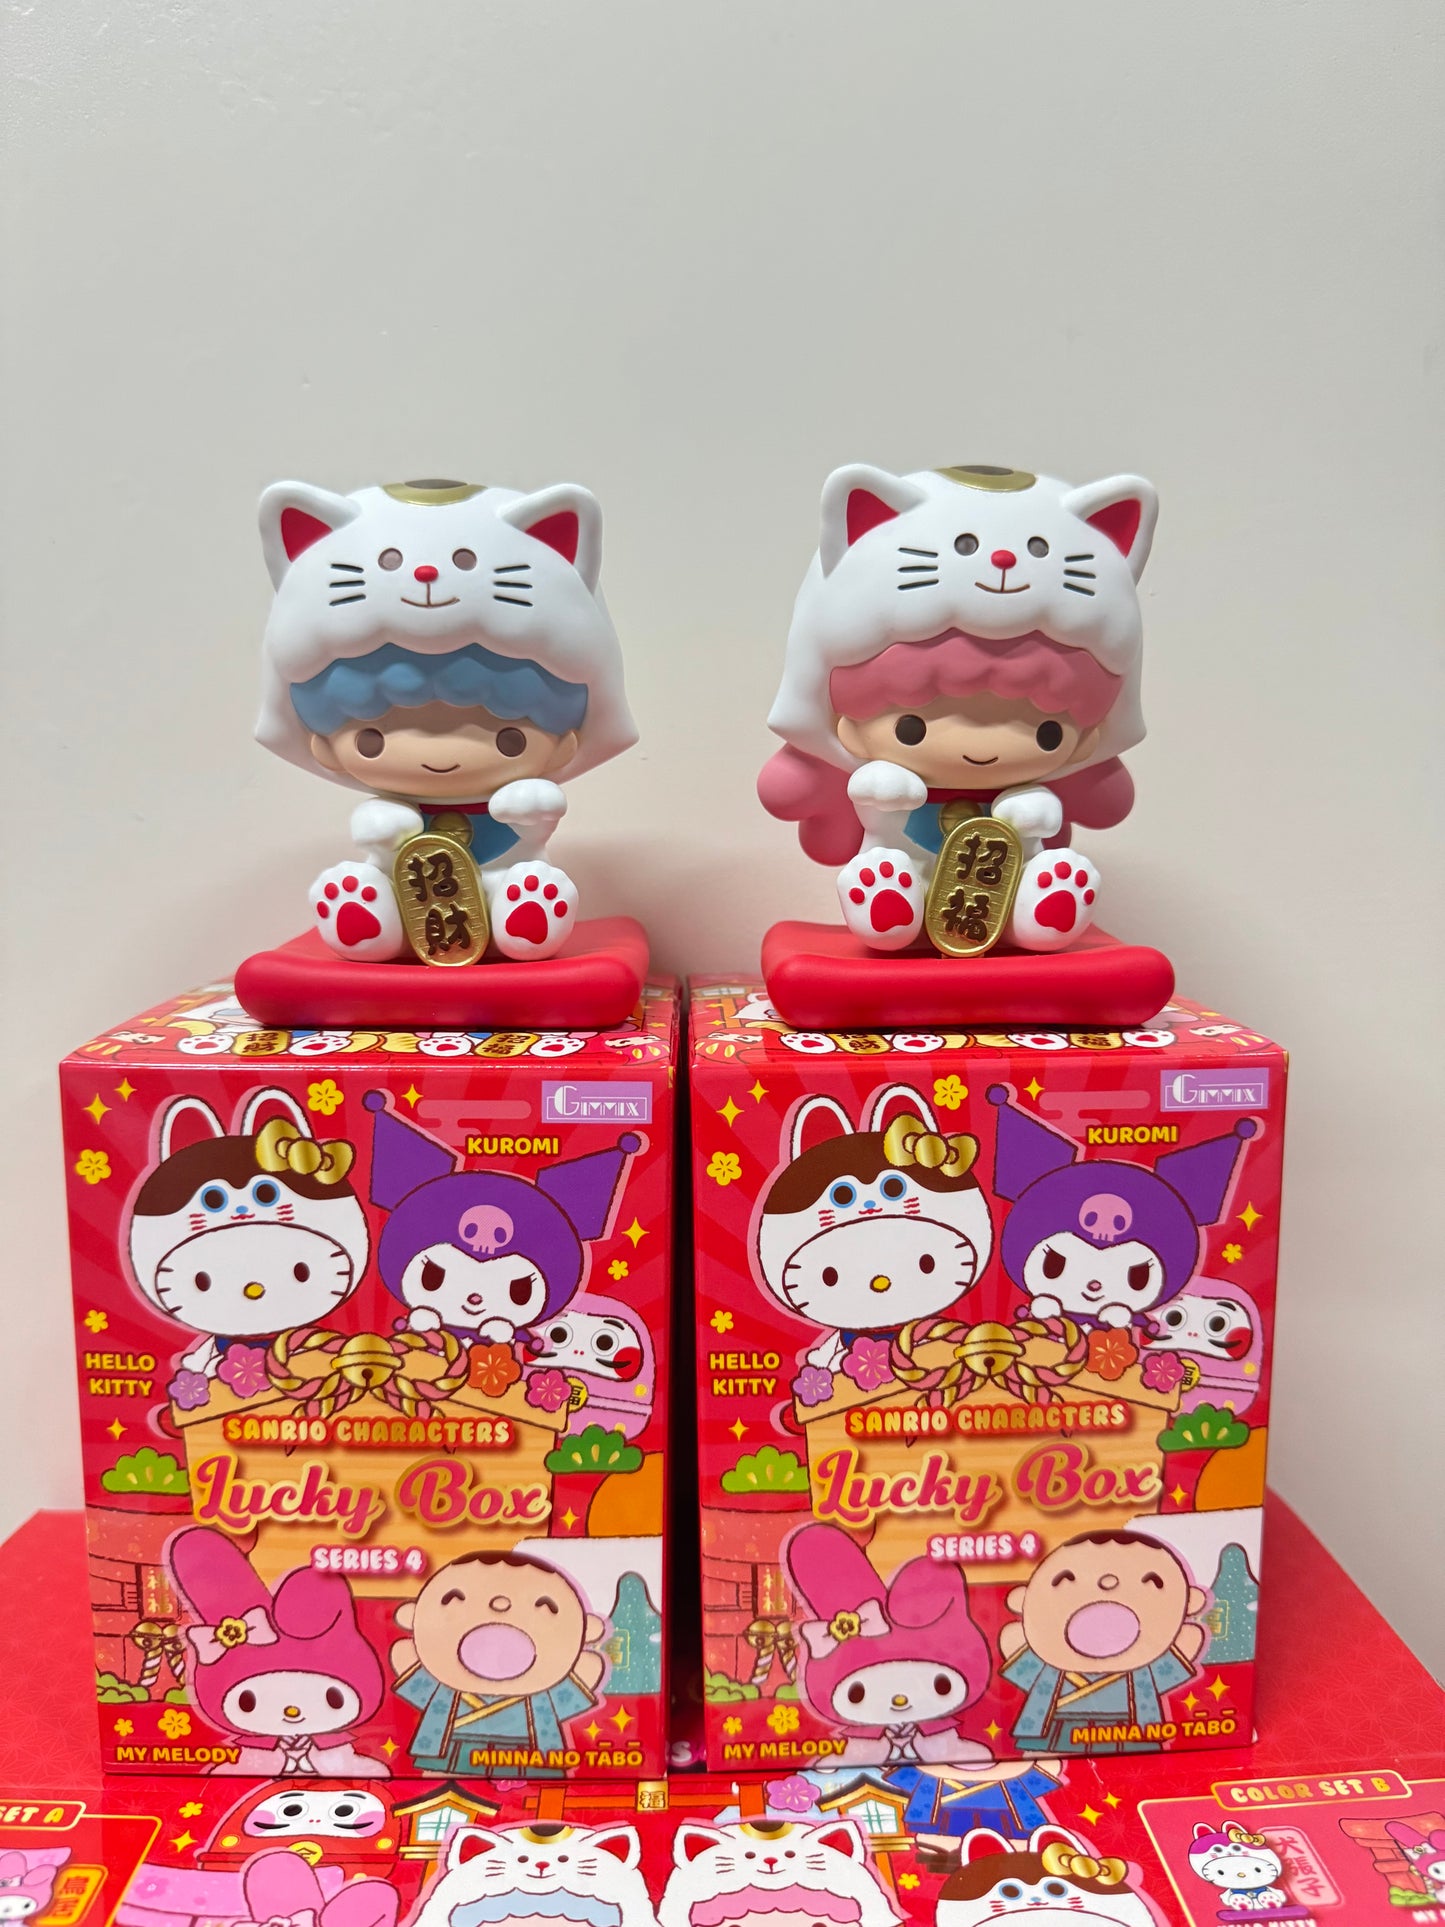 Mystery Blind Box Sanrio Characters Lucky Box | Series A Litte Twin Stars Meneki Lucky Cat - Kawaii Collectable Toys